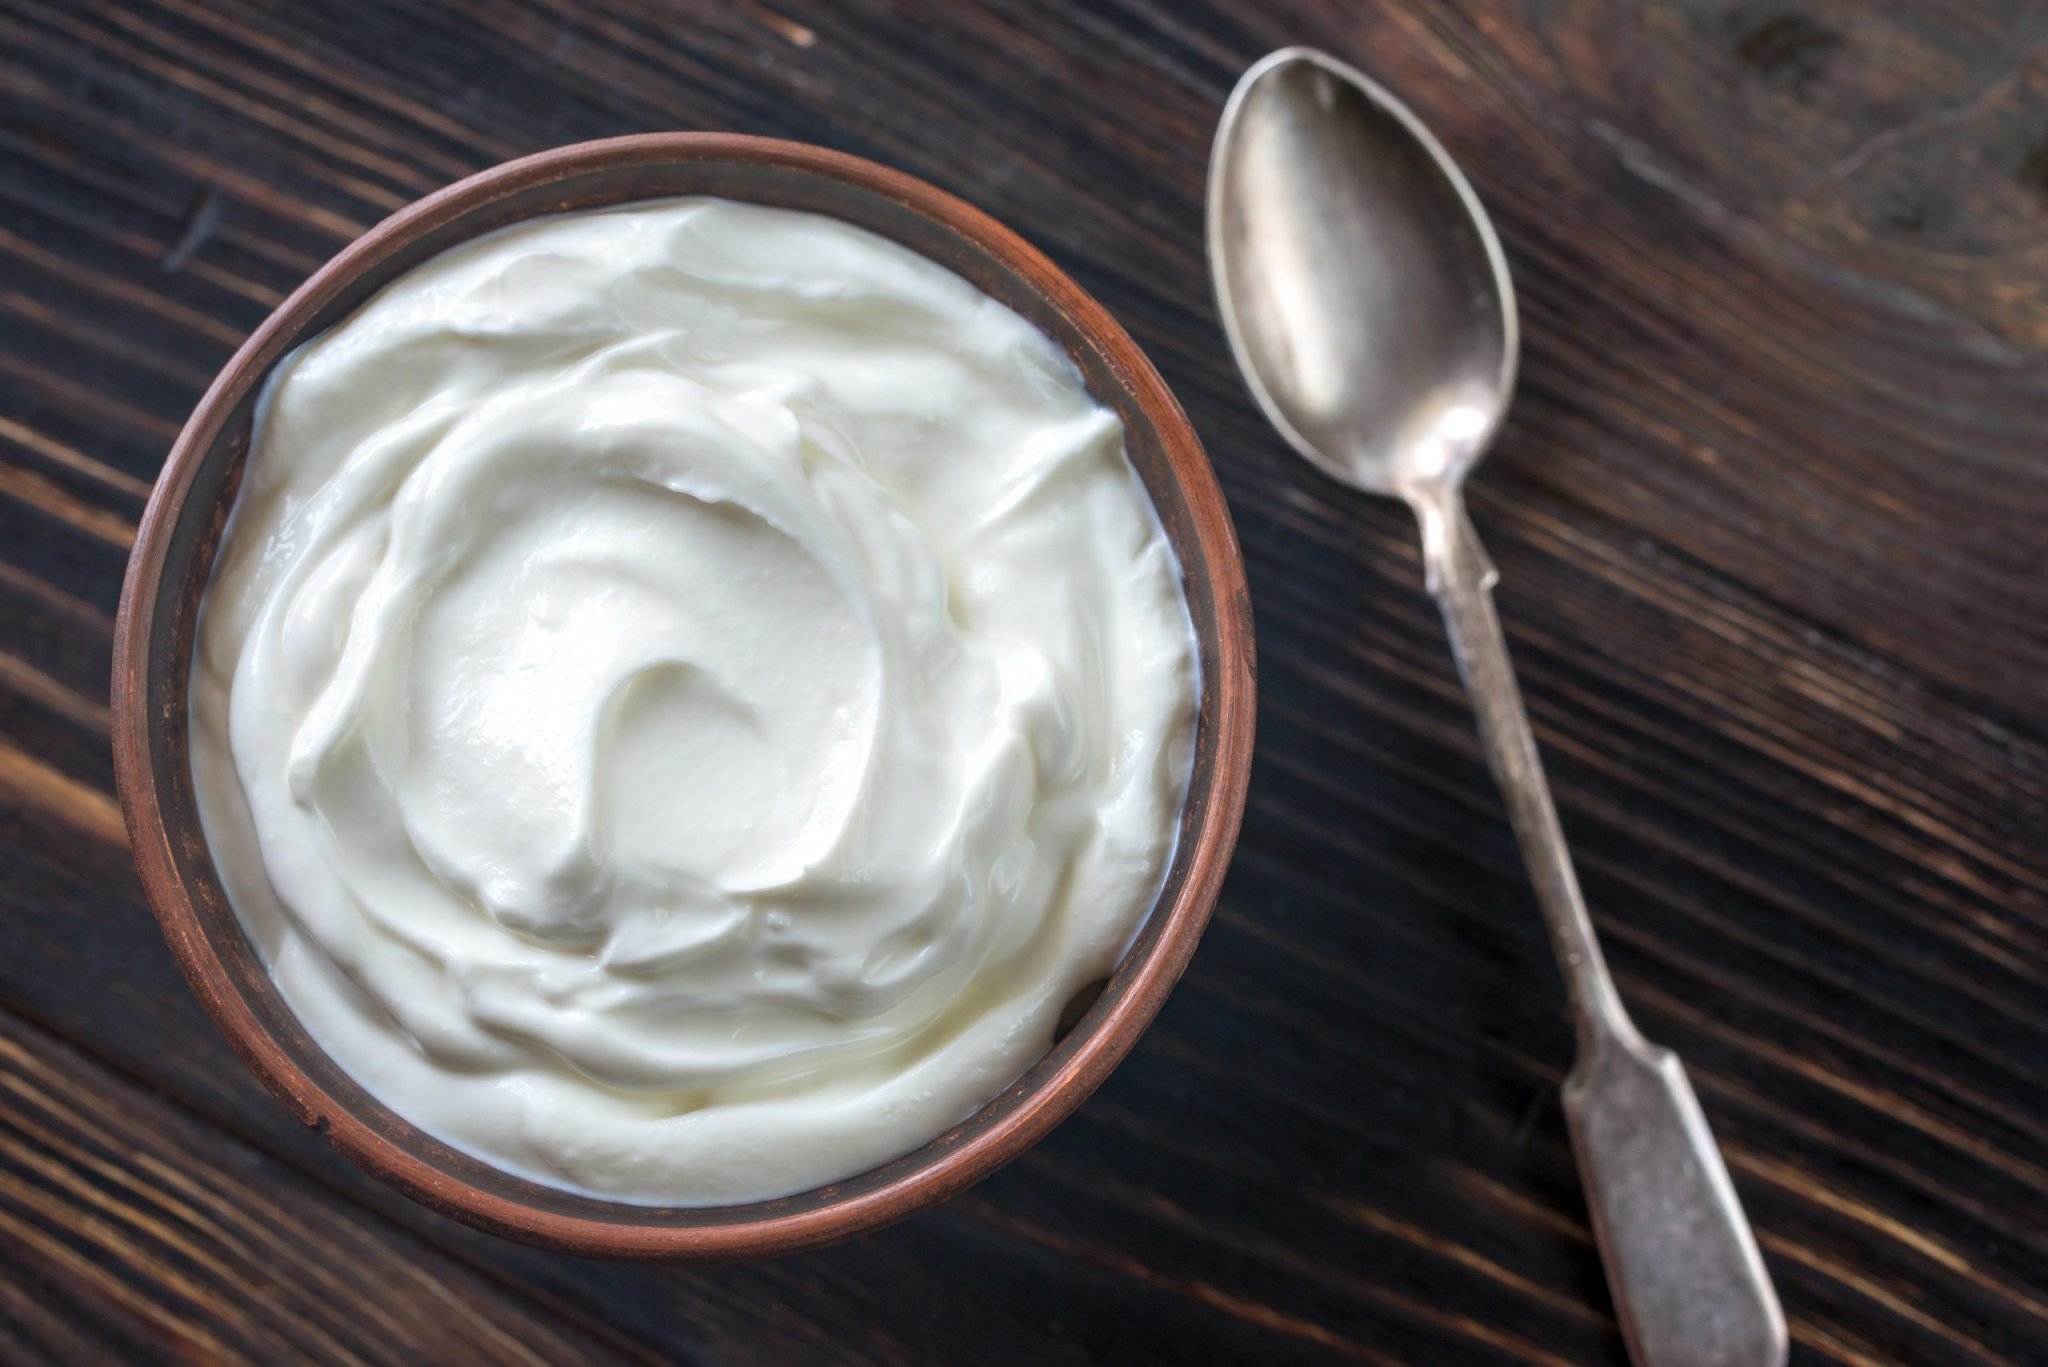 If You Don’t Eat Yogurt Every Day, This Might Convince You to Start